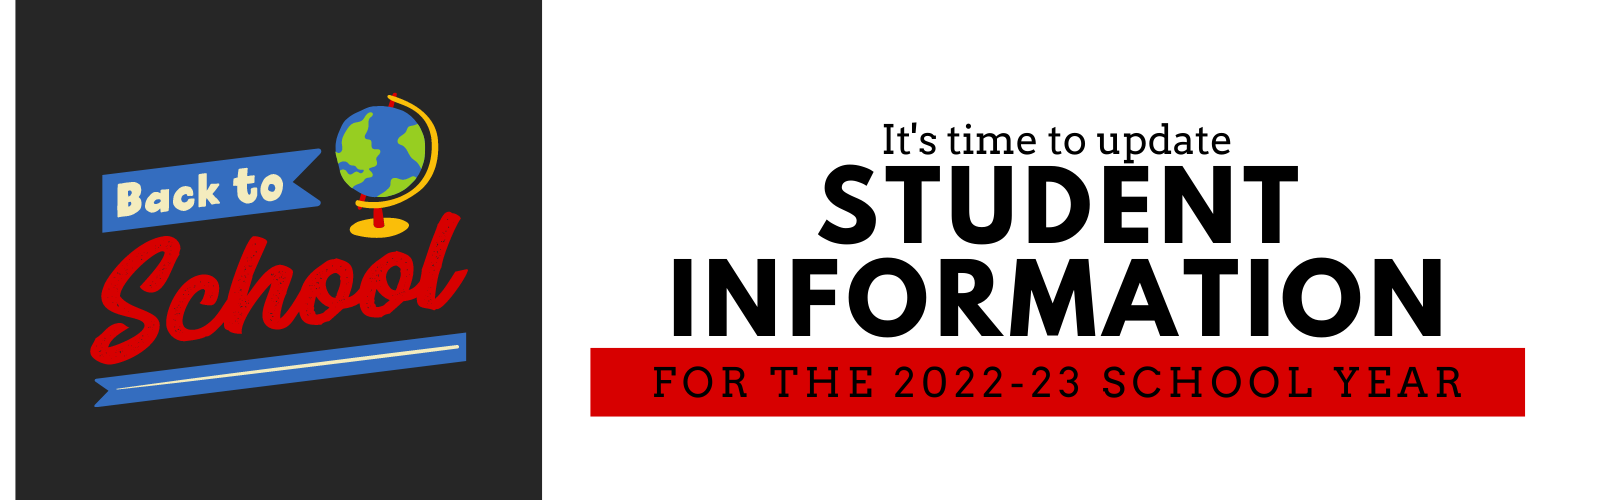 It's time to update student information for th 22-23 school year!